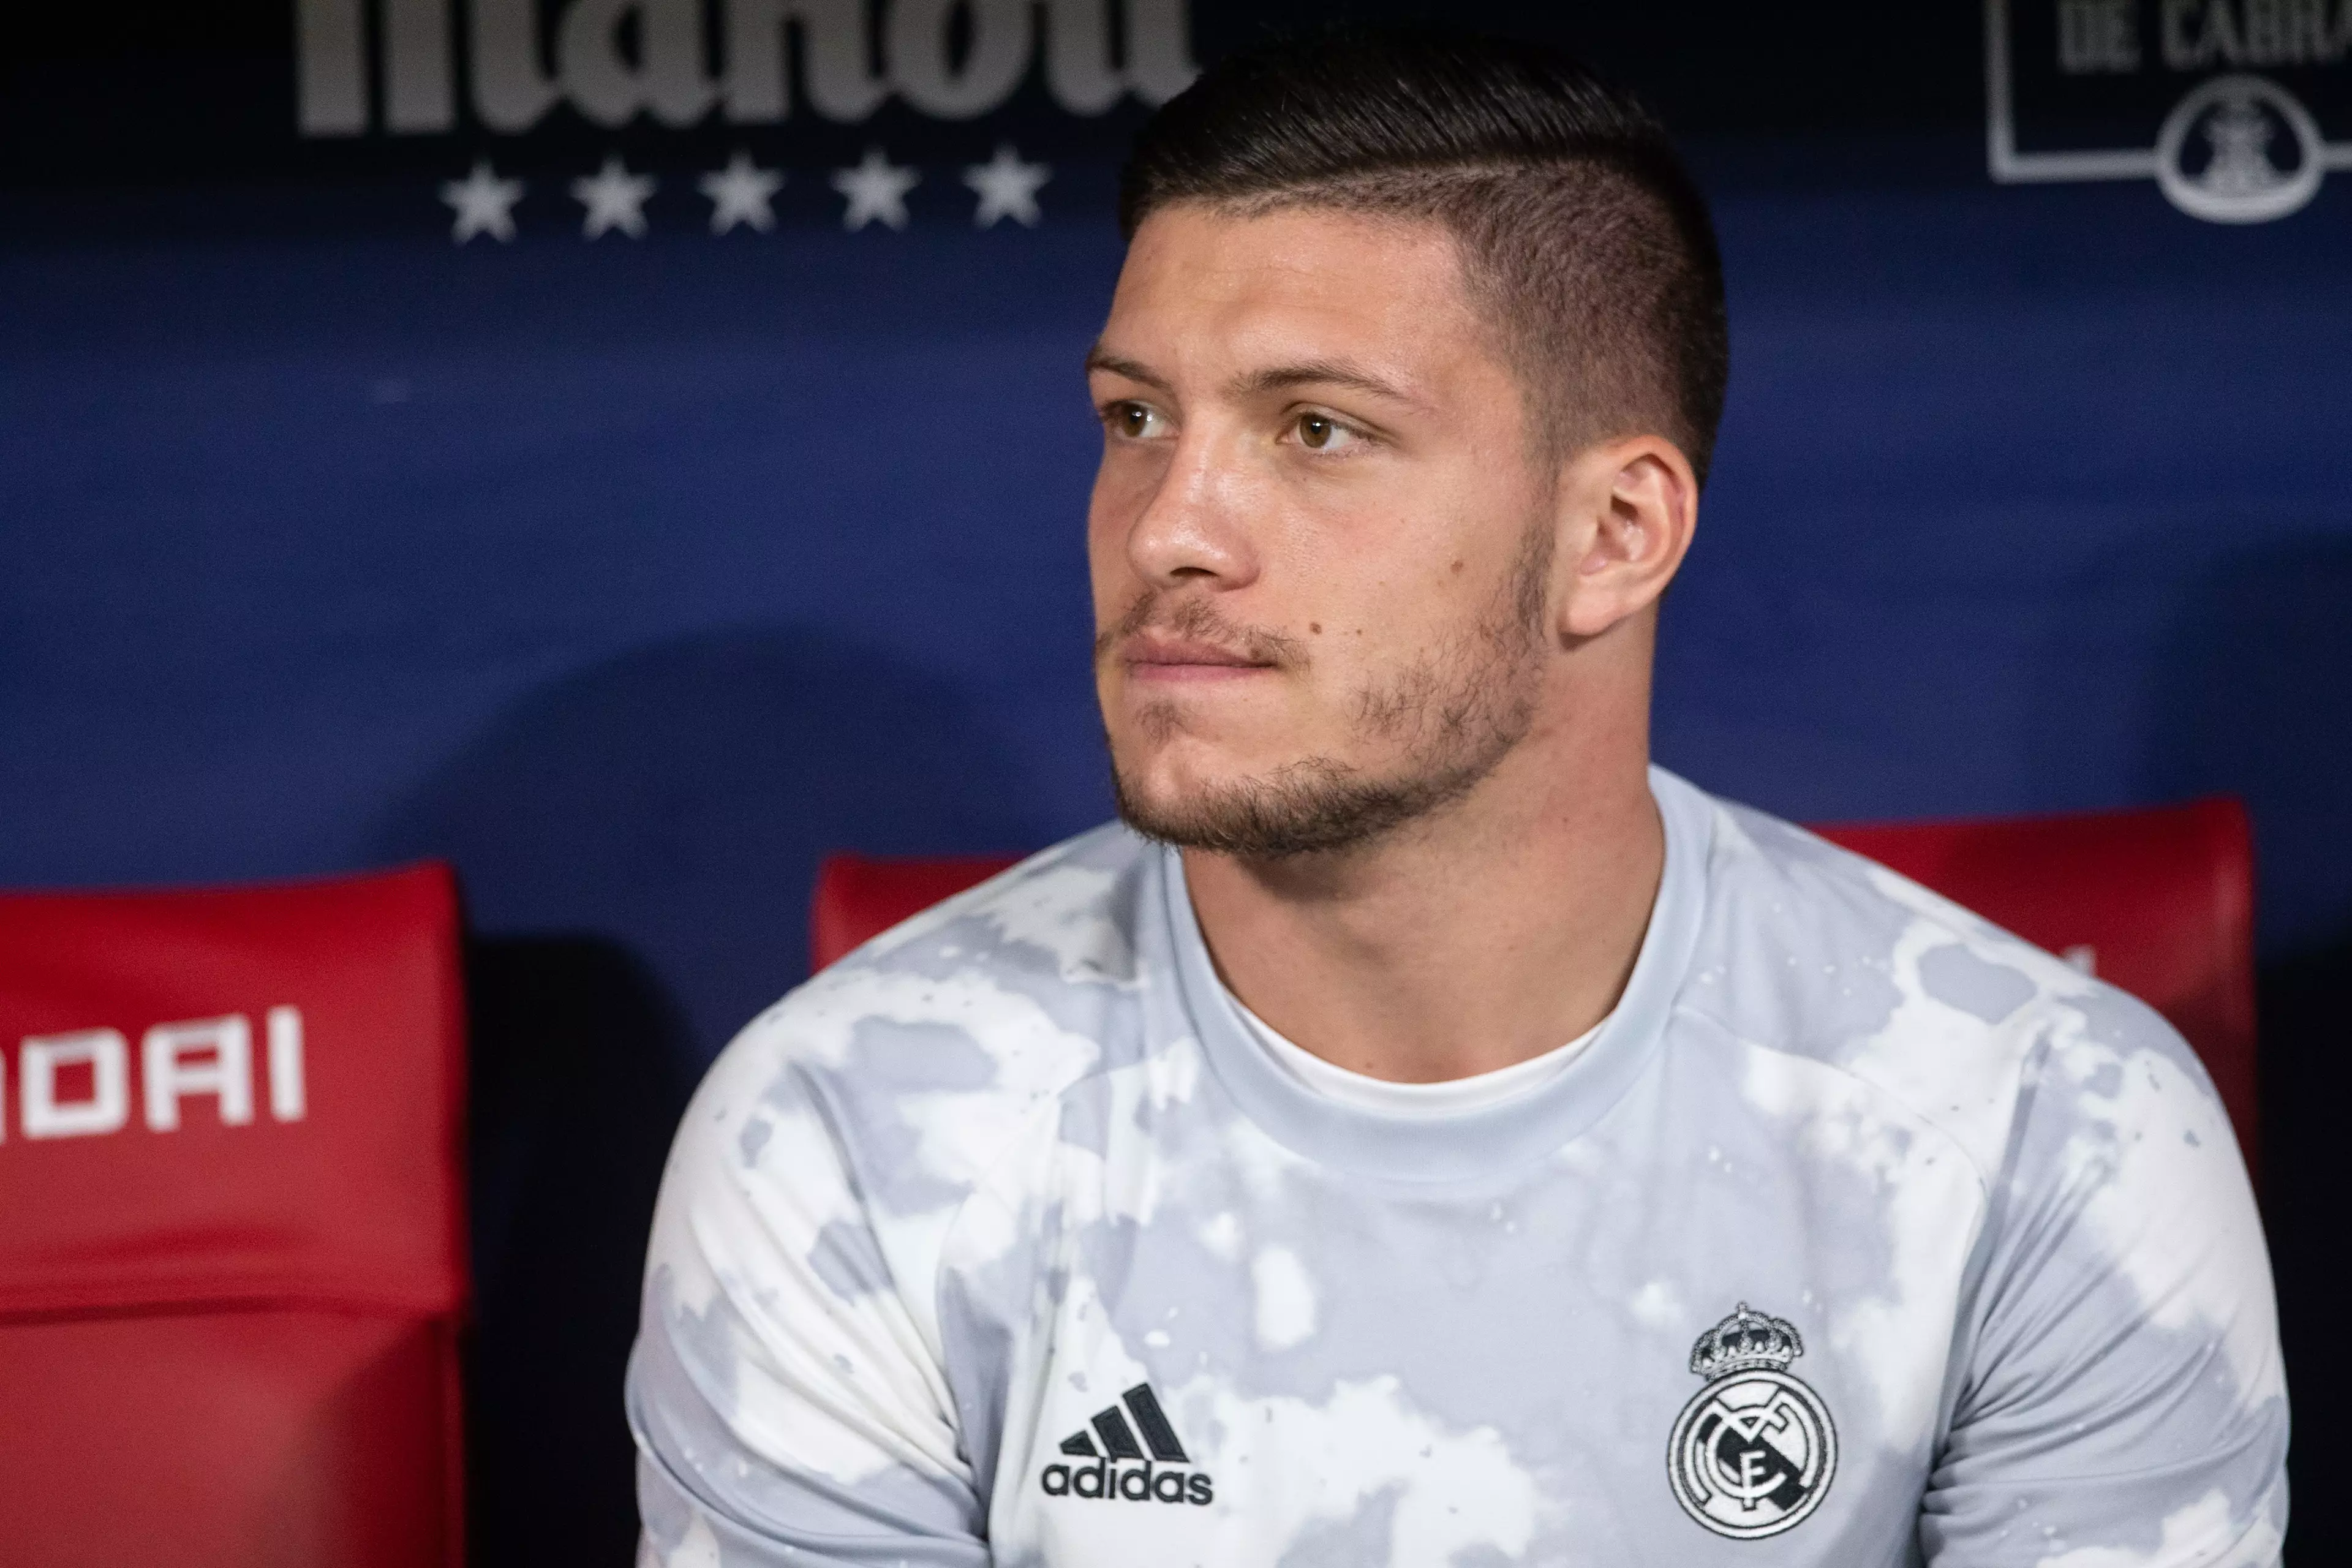 Jovic has had to get used to sitting on the bench this season. Image: PA Images